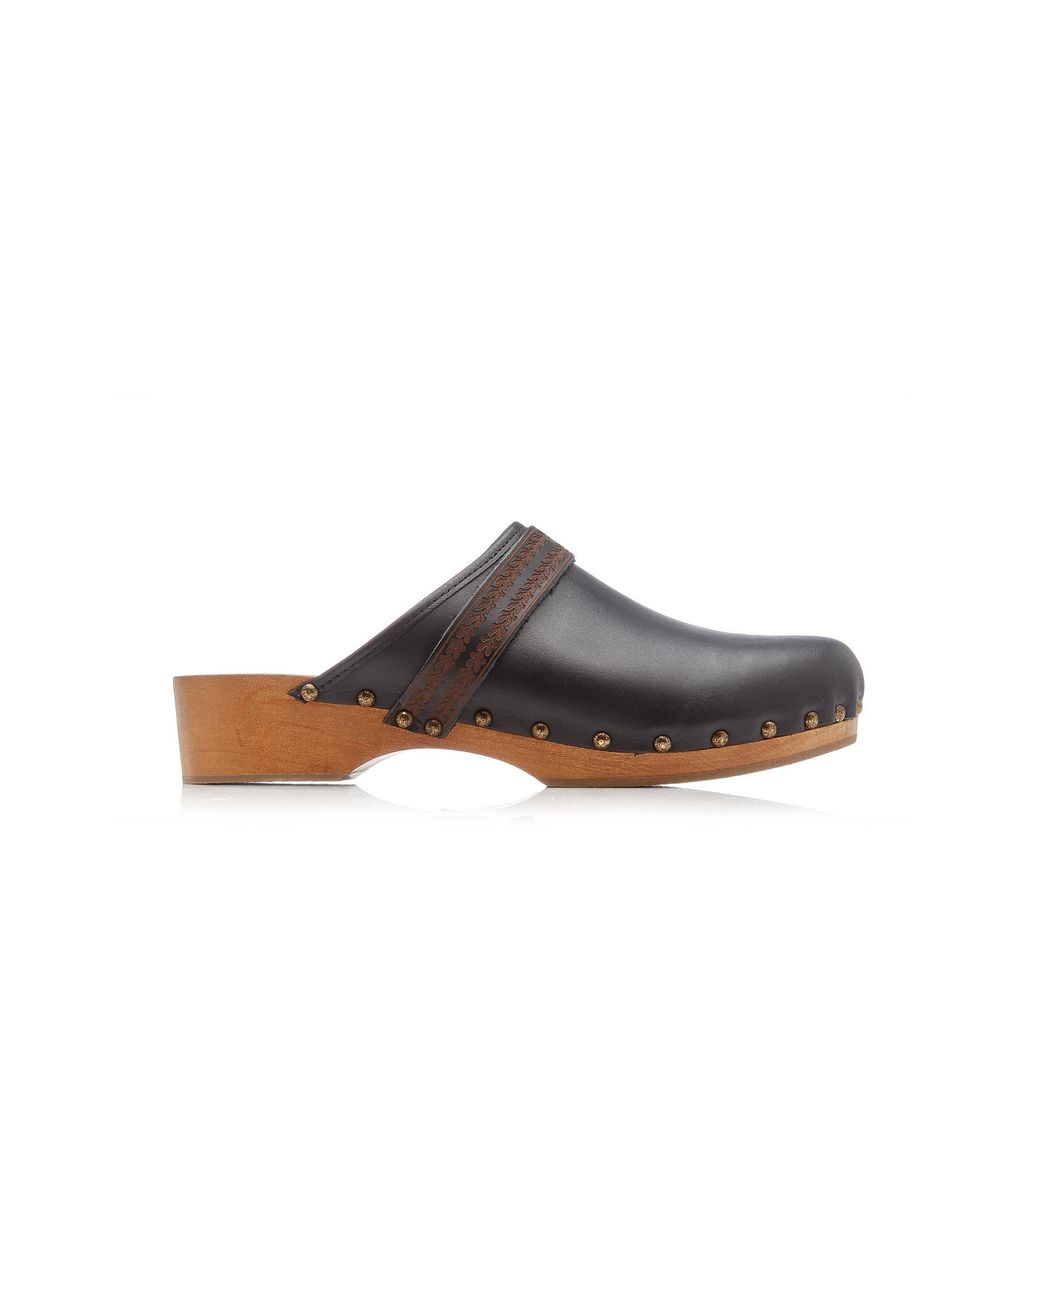 Isabel Marant Thalie Studded Leather Clogs in Black | Lyst